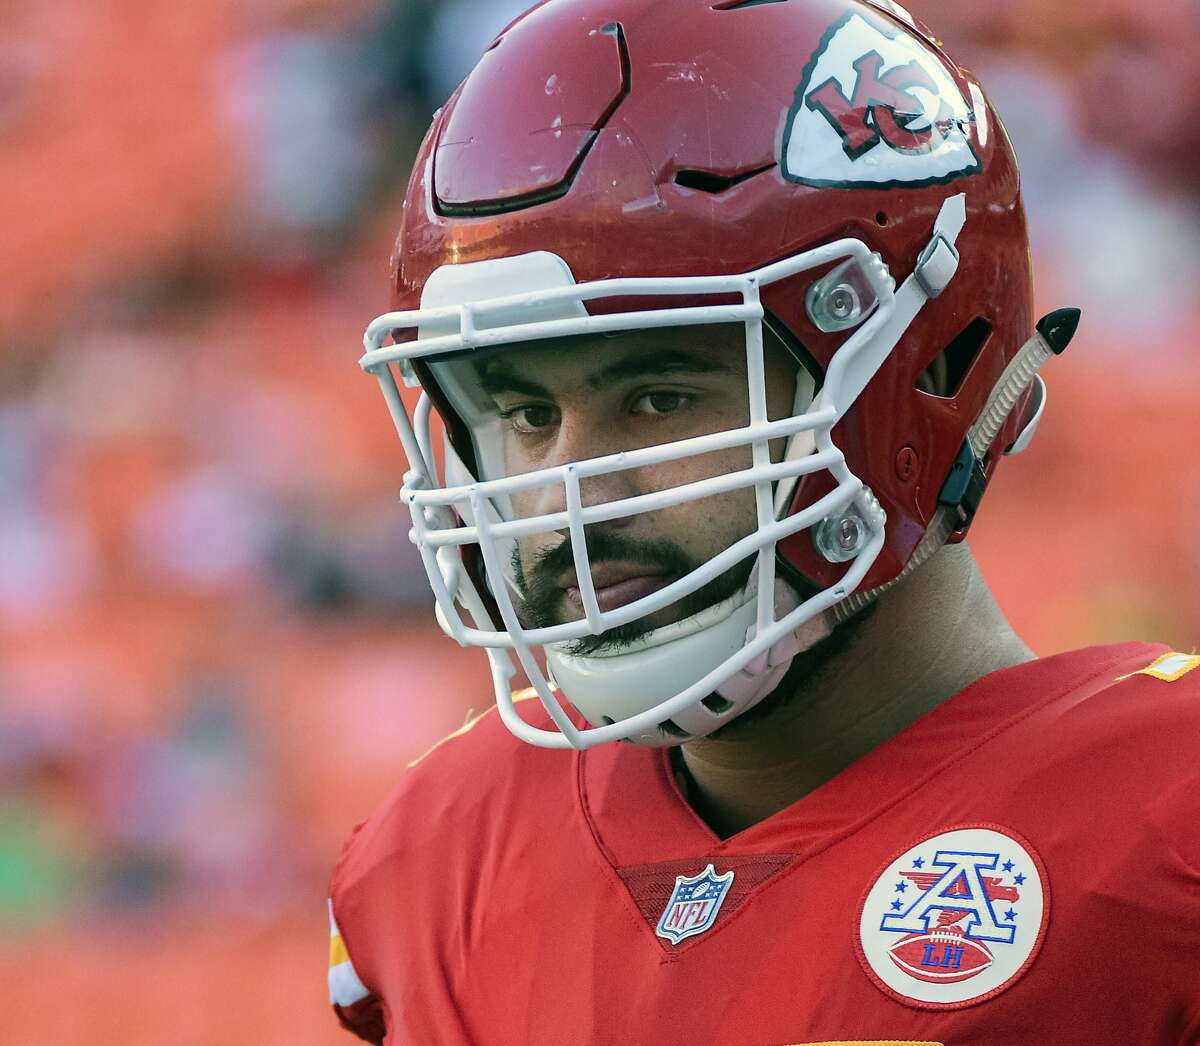 FILE - In this Aug. 11, 2017, file photo, Kansas City Chiefs offensive lineman Laurent Duvernay-Tardif (76) is shown during pre-game warmups before an NFL preseason football game in Kansas City, Mo. Chiefs offensive lineman Laurent Duvernay-Tardif can finally put away the medical books for a while and spend all his free time studying up his playbook. Duvernay-Tardif graduated from McGill University's medical school on Tuesday, May 29, 2018. (AP Photo/Reed Hoffmann, File)